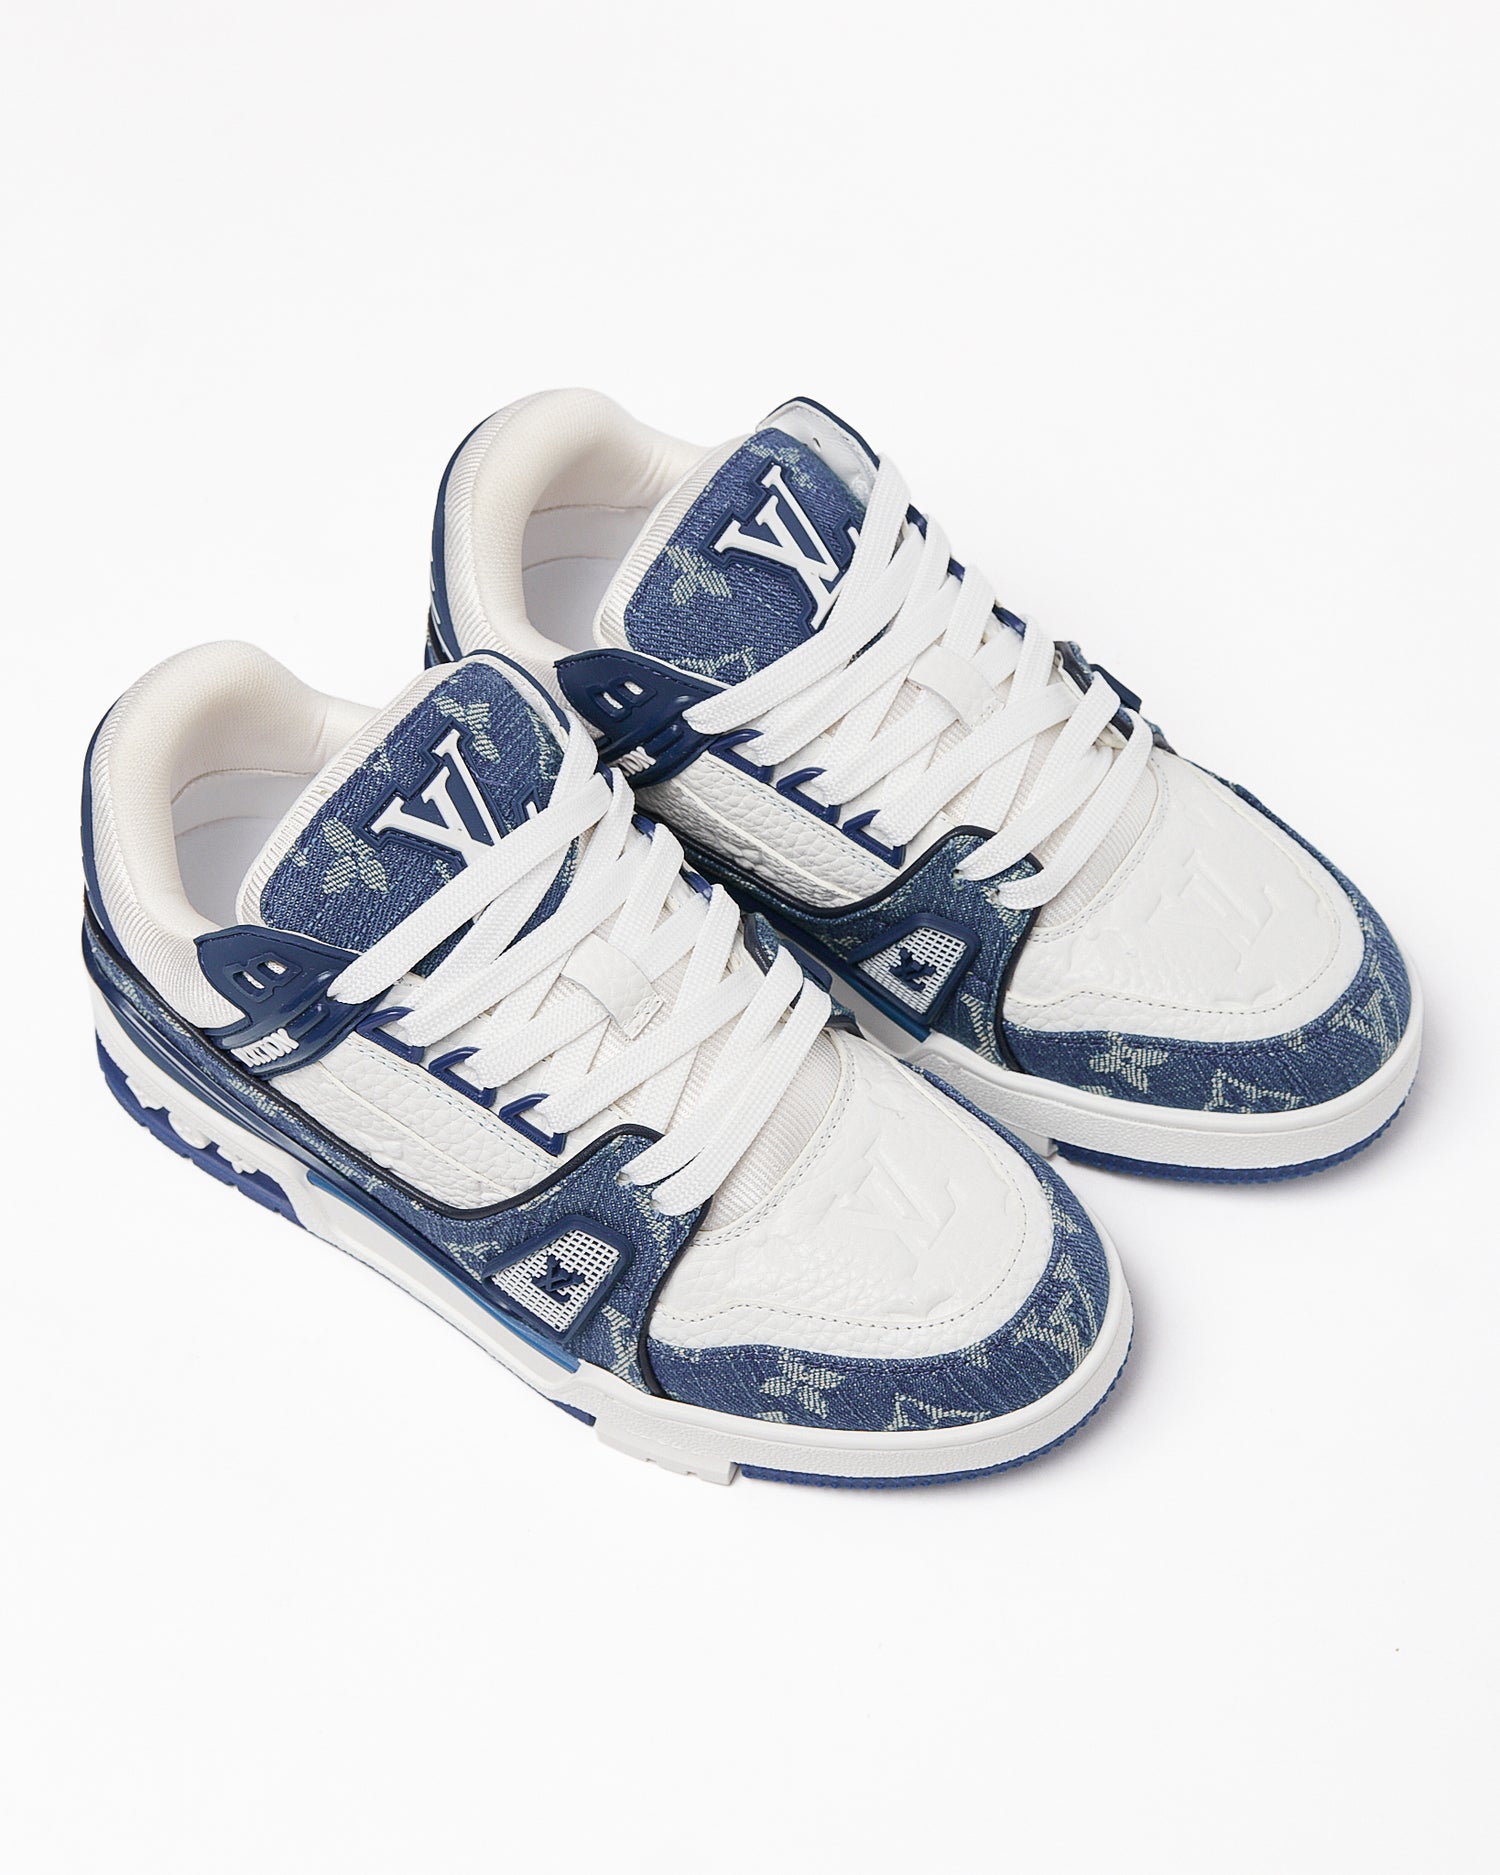 LV Trainer Shoes 165.90